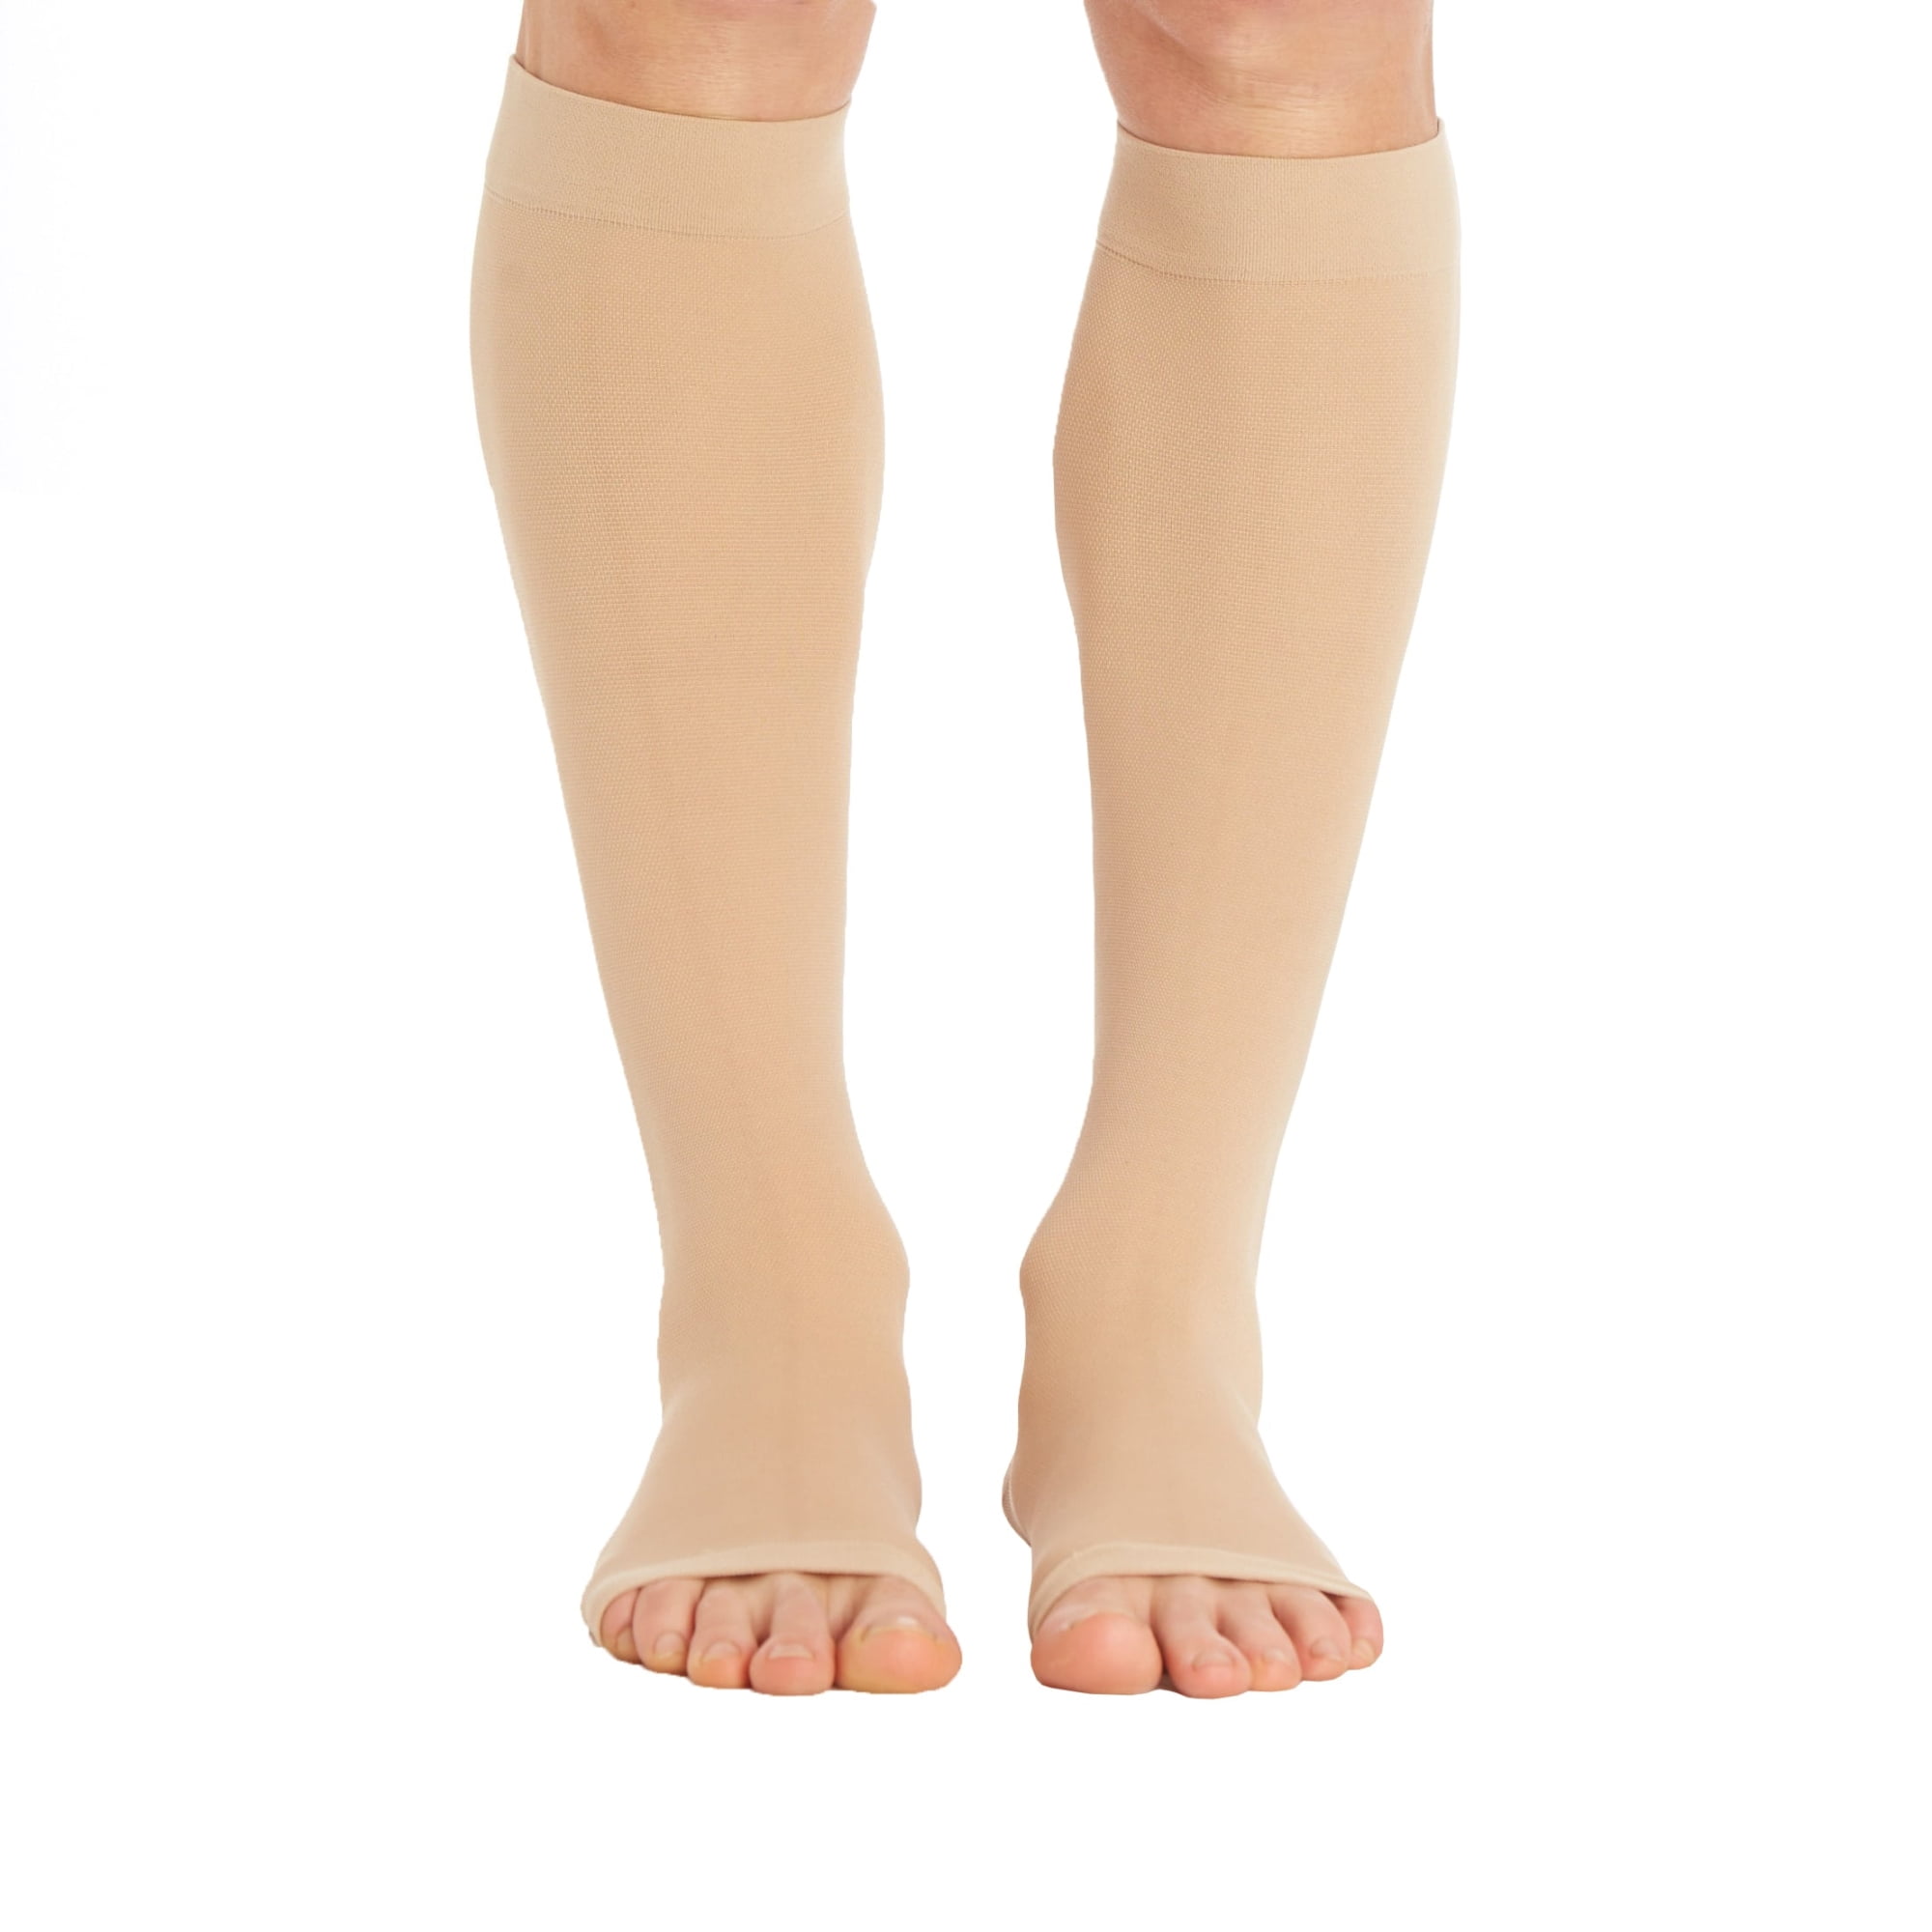 Unisex Compression Socks 20-30mmHg with Open Toe - USA